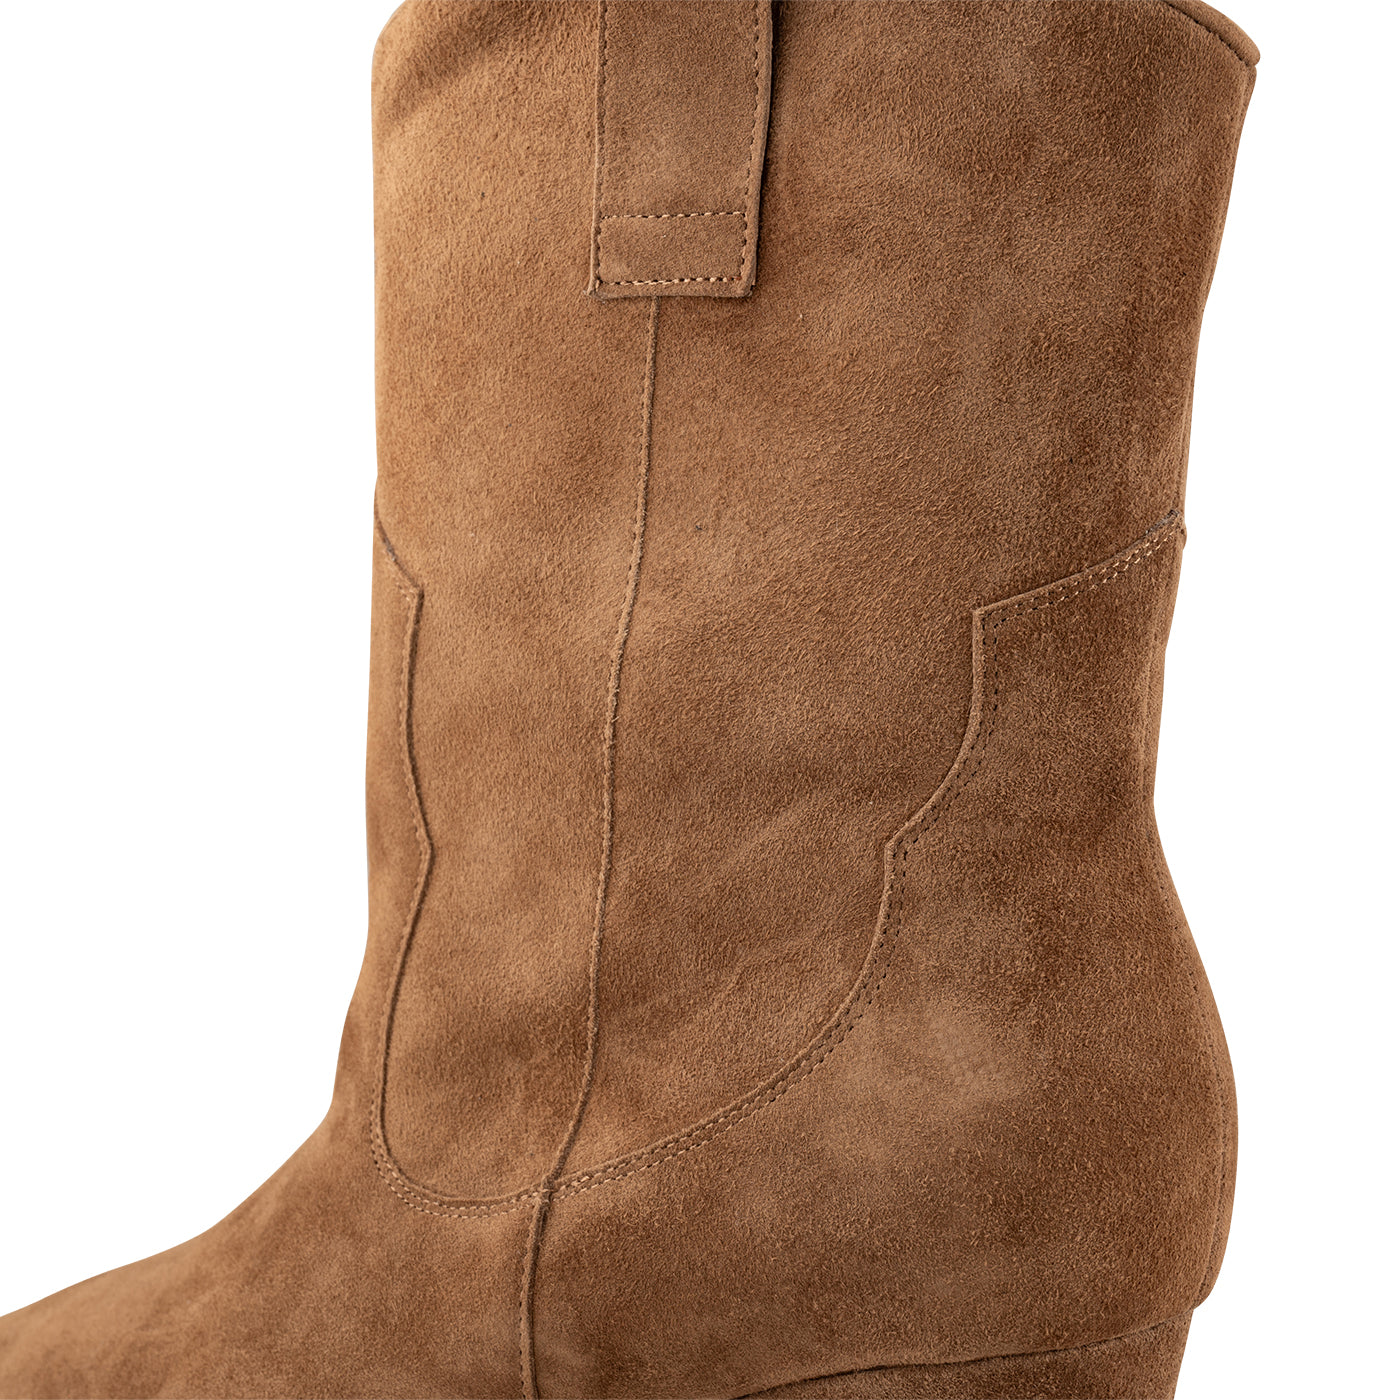 SHOE THE BEAR WOMENS STB-Dicte S Boots 586 Caramel